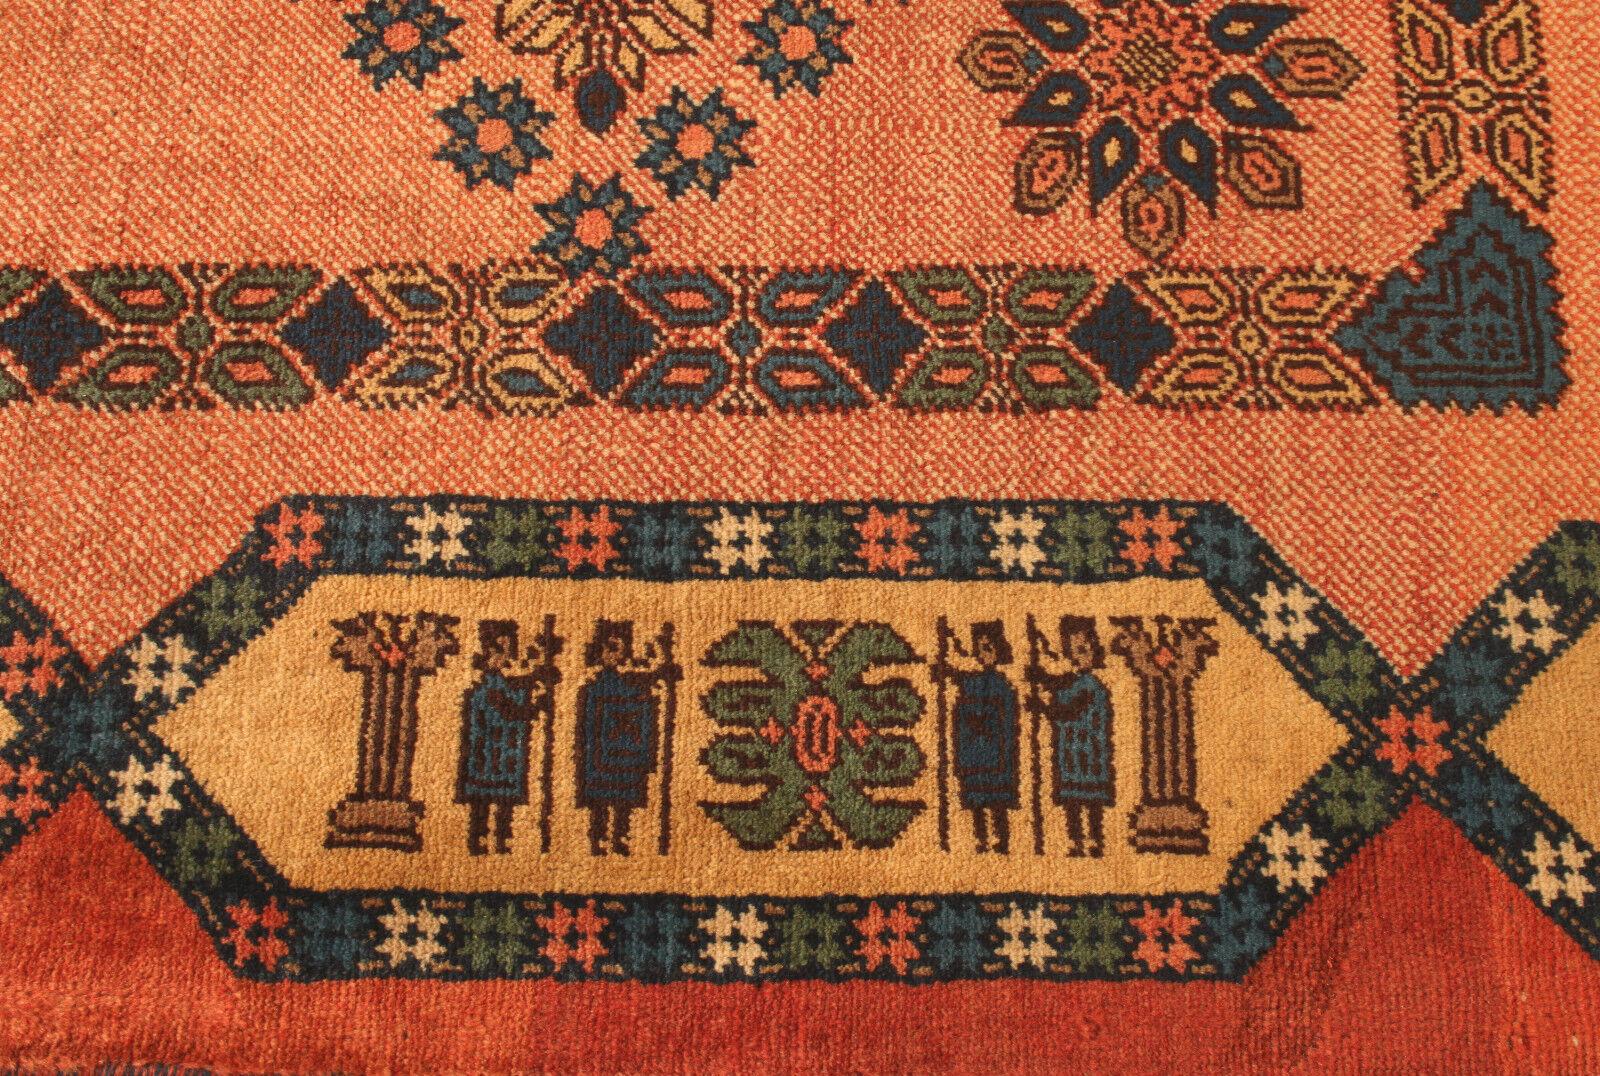 Late 20th Century Handmade Vintage Persian Style Yalameh Rug 3.3' x 4.6', 1990s - 1T18 For Sale